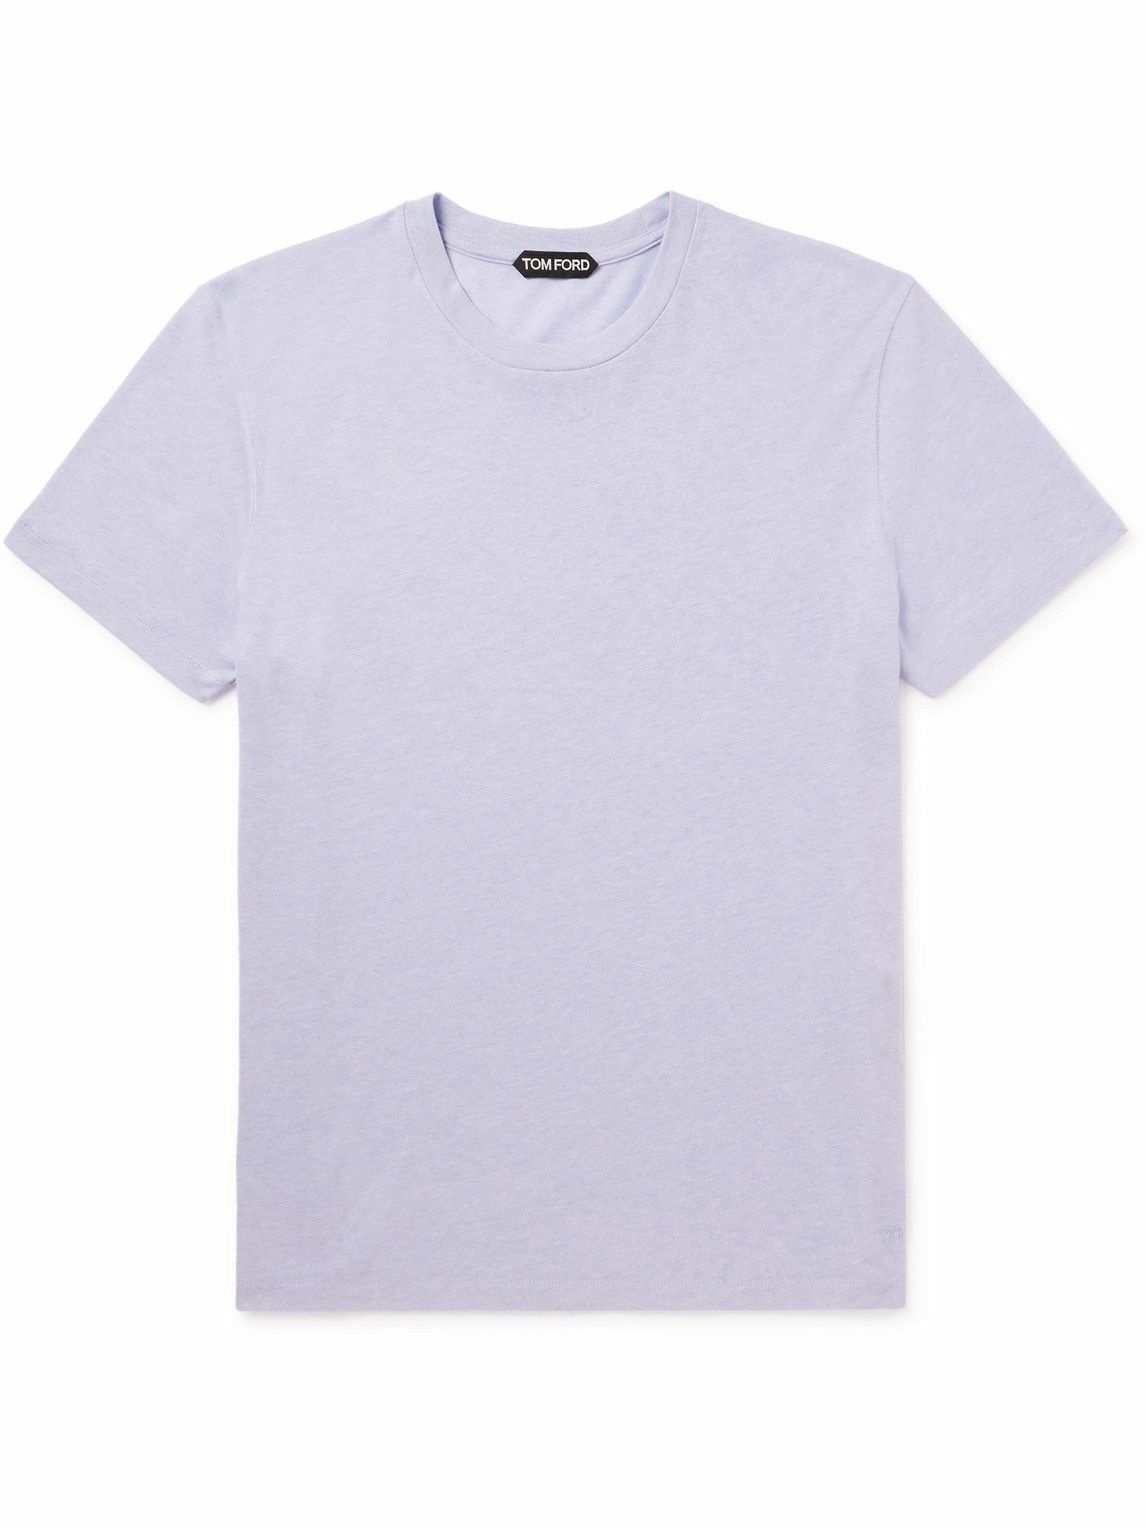 TOM FORD - Logo-Embroidered Cotton-Blend Jersey T-Shirt - Purple TOM FORD